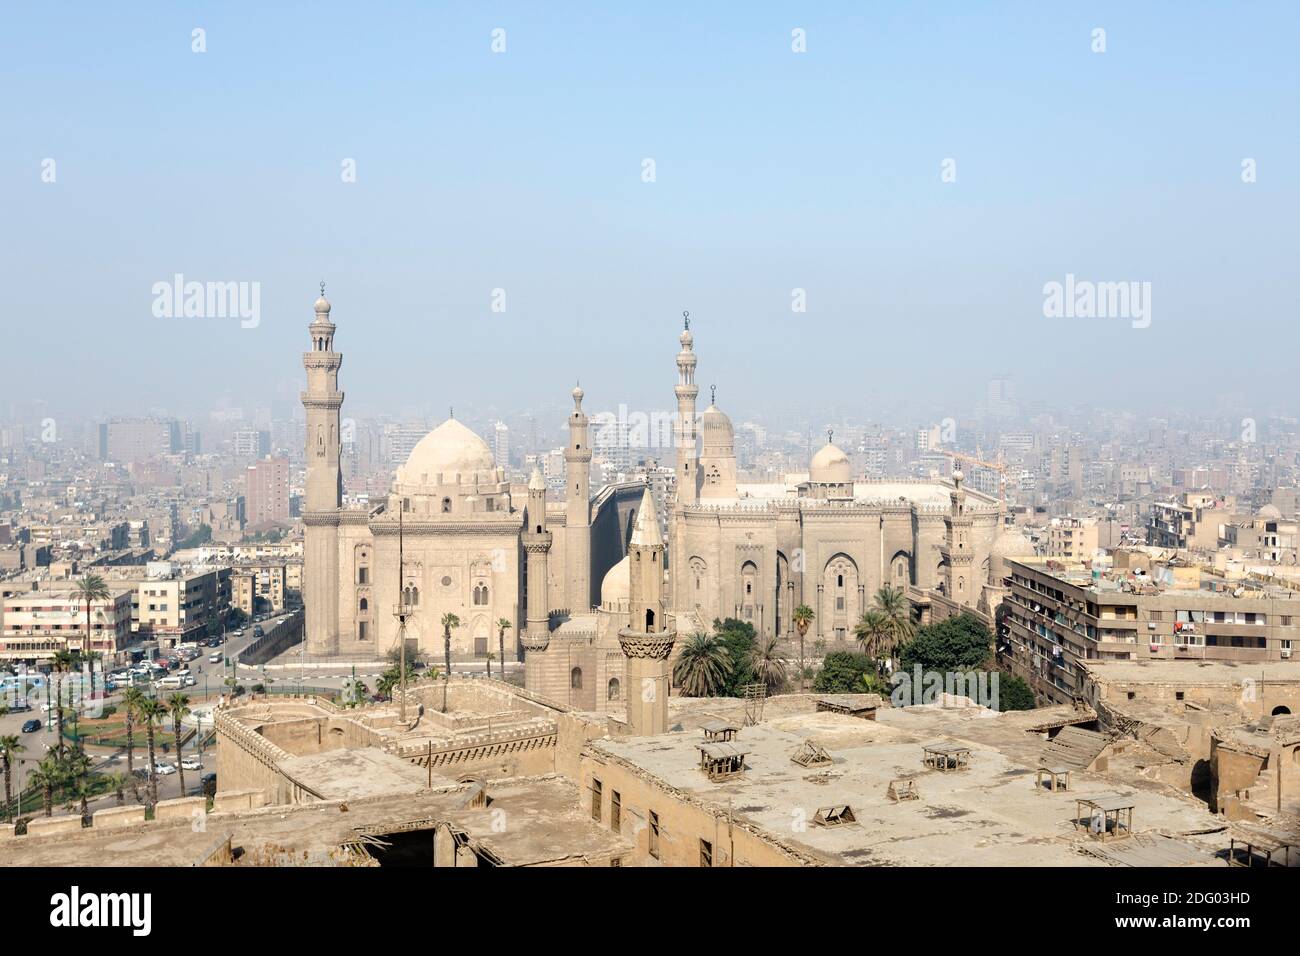 The mosque and madrassa of sultan Hassan, Cairo, Egypt Stock Photo